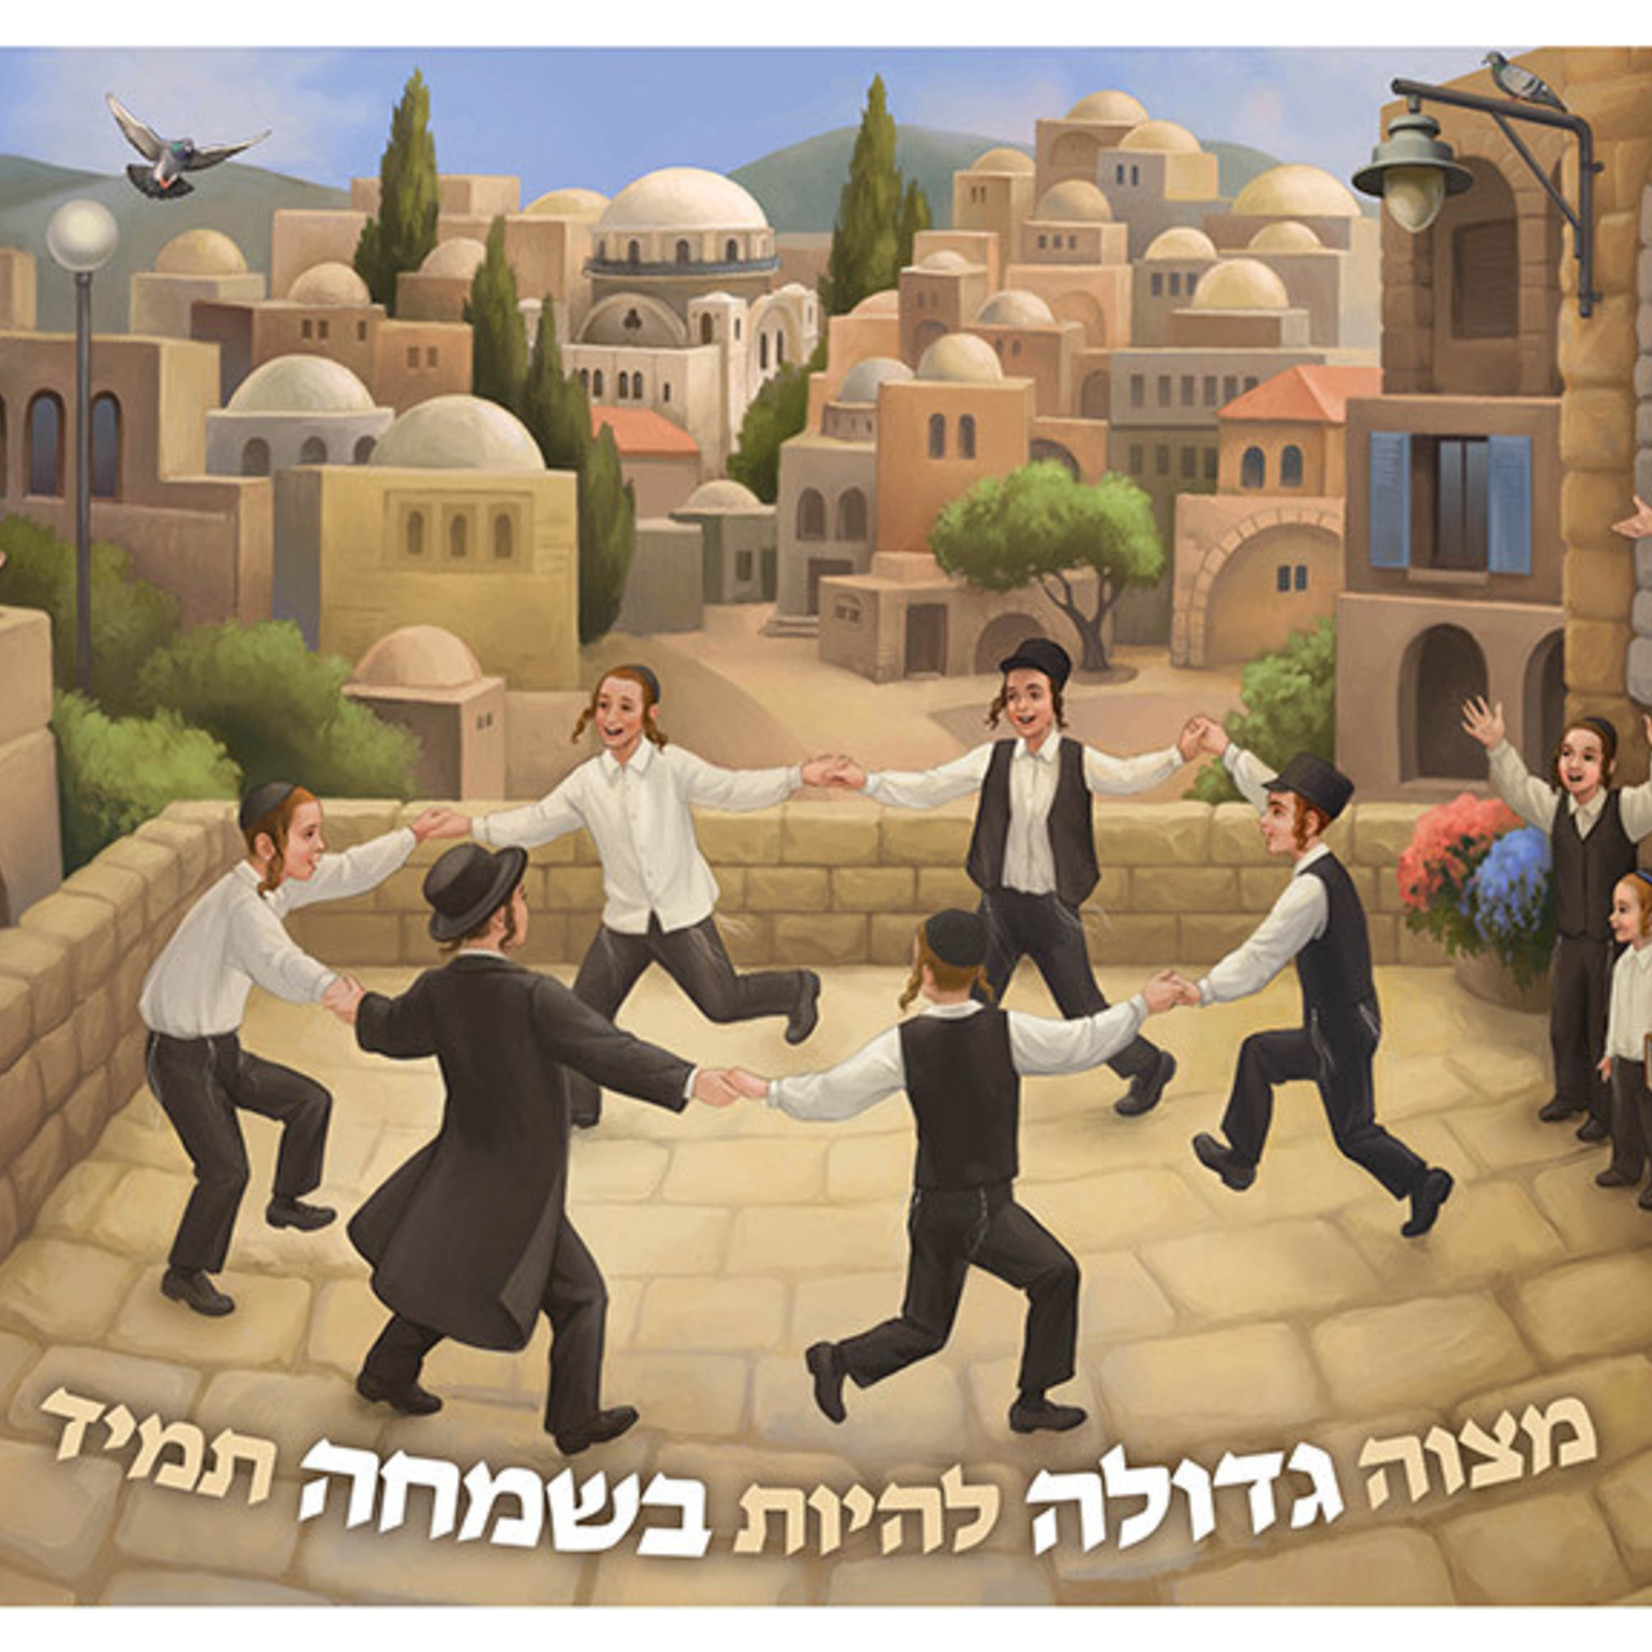 Besimcha Tamid Poster